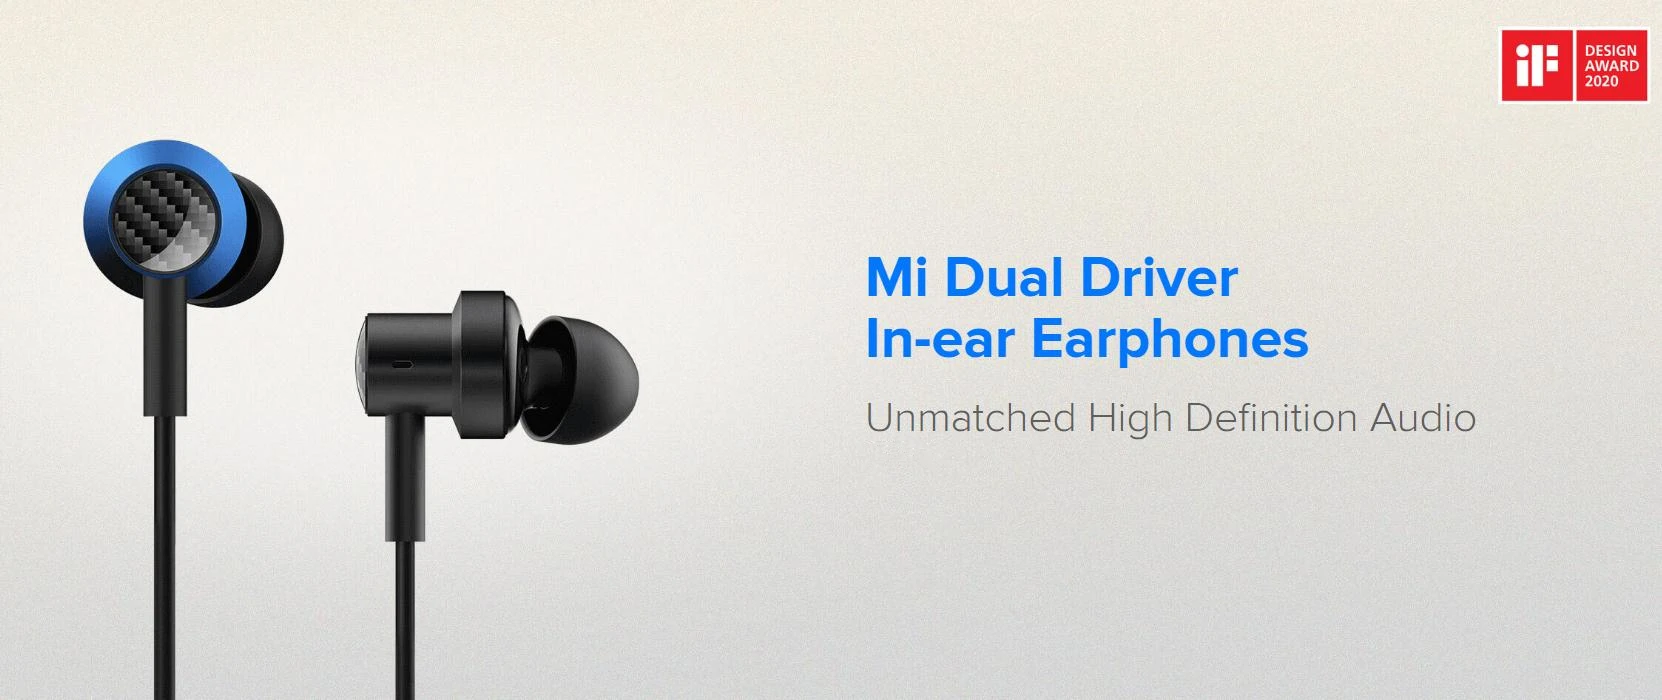 €23 with coupon for Xiaomi Dual Drivers Earphone 3.5mm Earphones HiFi Deep  Bass Wired Control Magnetic Earbuds Headphone with Mic from BANGGOOD -  China secret shopping deals and coupons